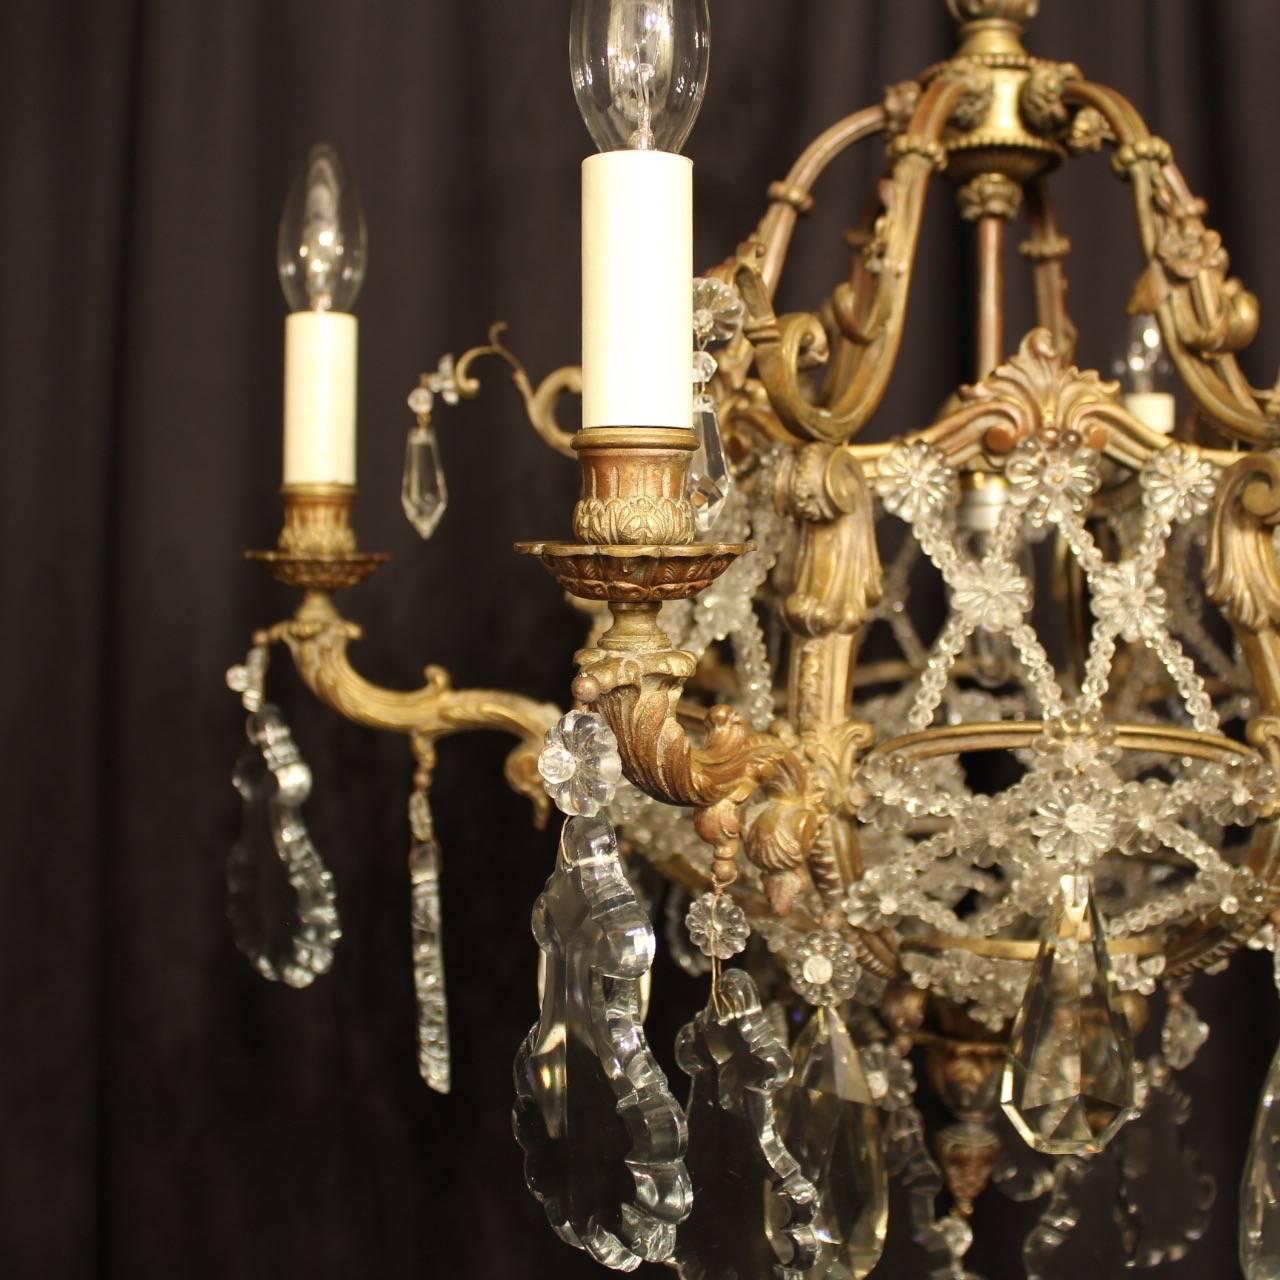 A French gilded cast bronze and crystal seven-light birdcage form antique chandelier, the six scrolling arms with foliated bobeche drip pans and bulbous candle sconces, issuing from a cage form interior decorated with lovely cut-glass lattice work